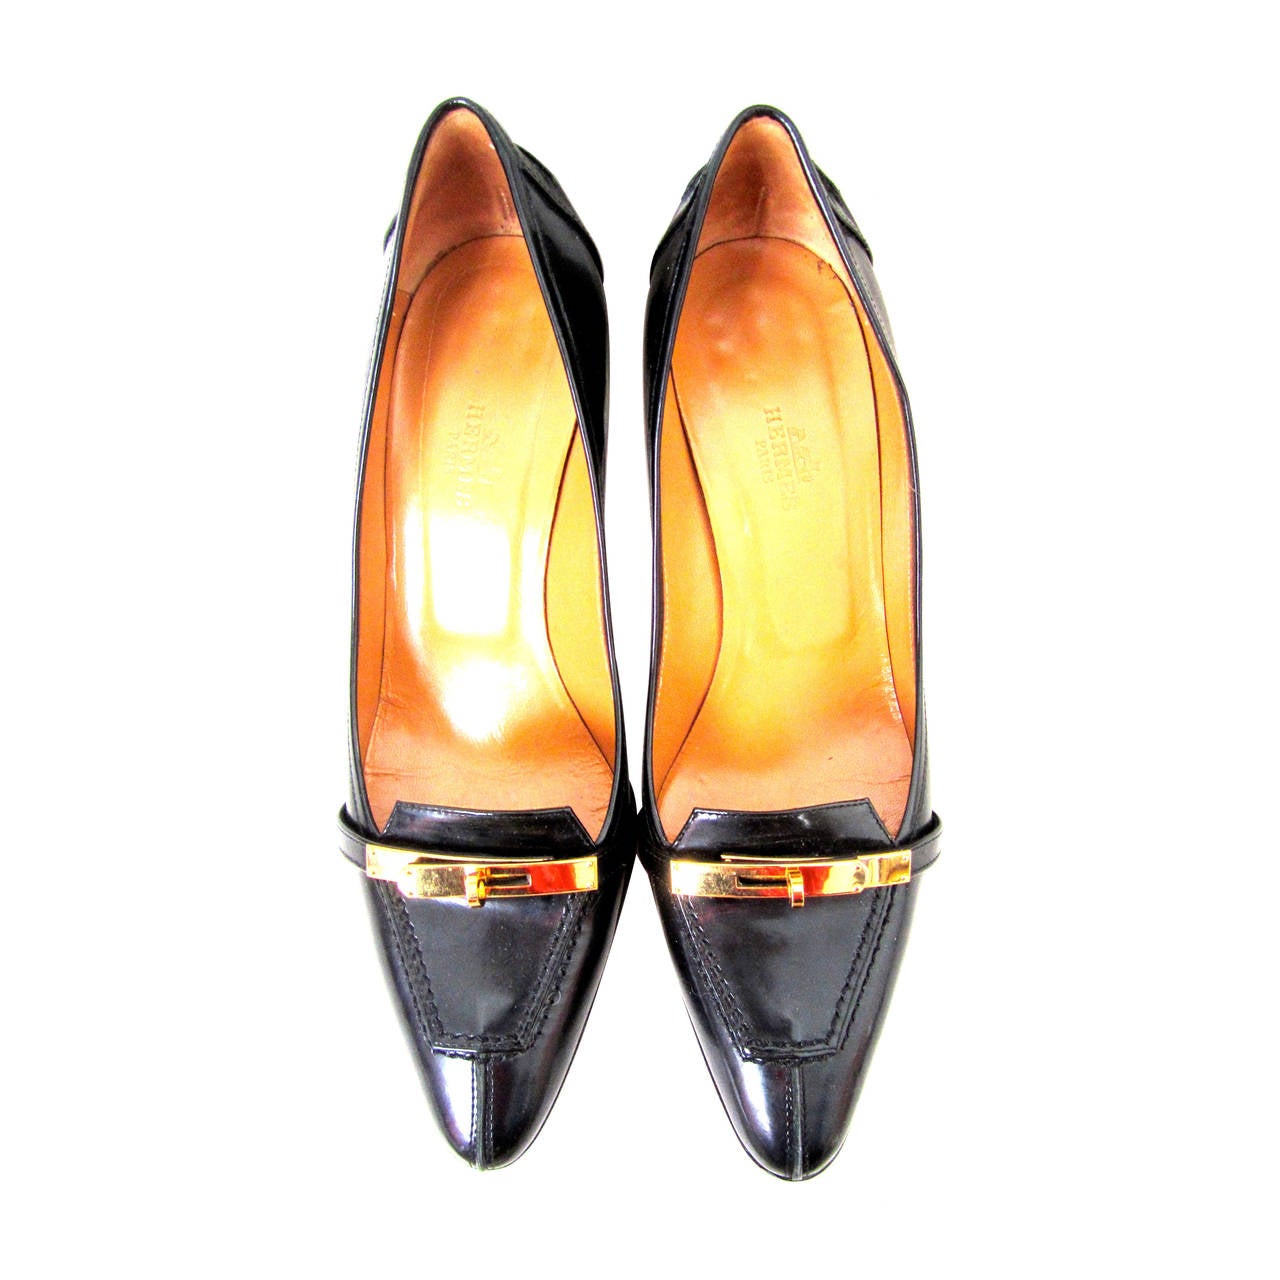 Hermes Pumps - Black - Kelly Style Gold Tone Hardware - Size 38 at 1stDibs